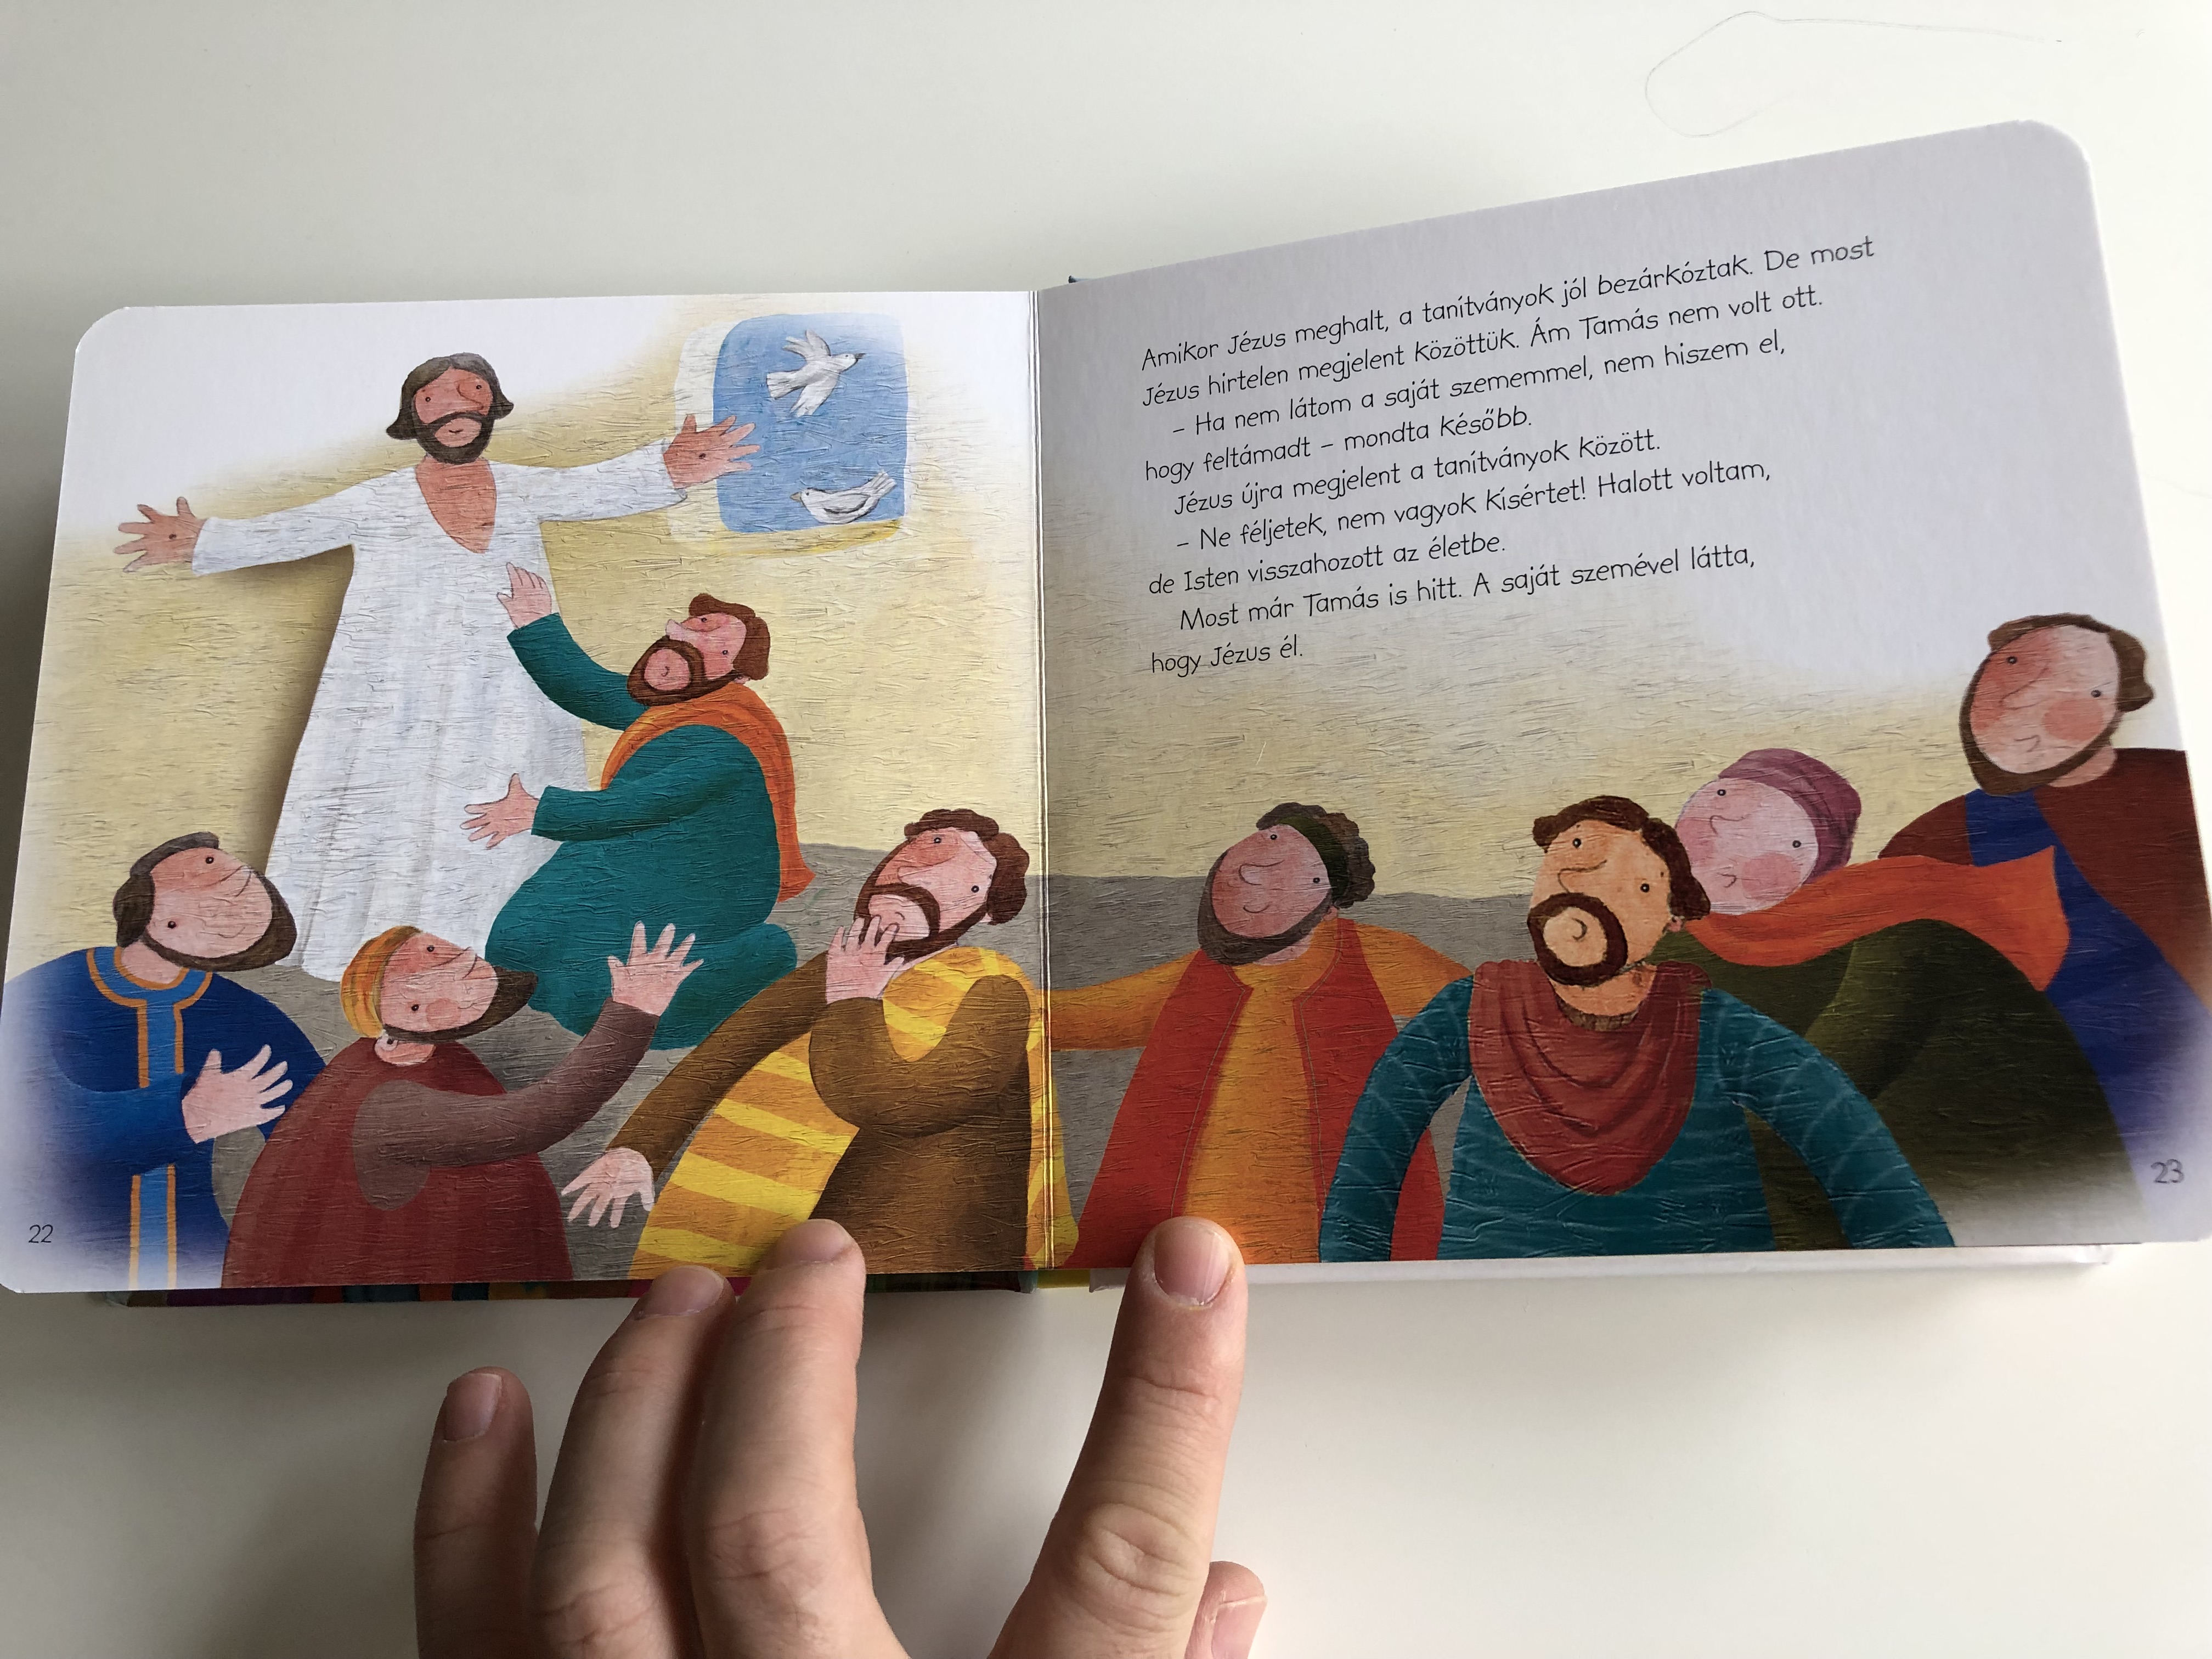 kir-ly-szam-rh-ton-by-bethan-james-k-llai-nagy-krisztina-hungarian-translation-of-the-miracle-of-easter-easter-mini-book-this-vibrant-retelling-of-the-easter-story-covers-biblical-events-from-palm-sunday-through-to-after-je-7274617-.jpg